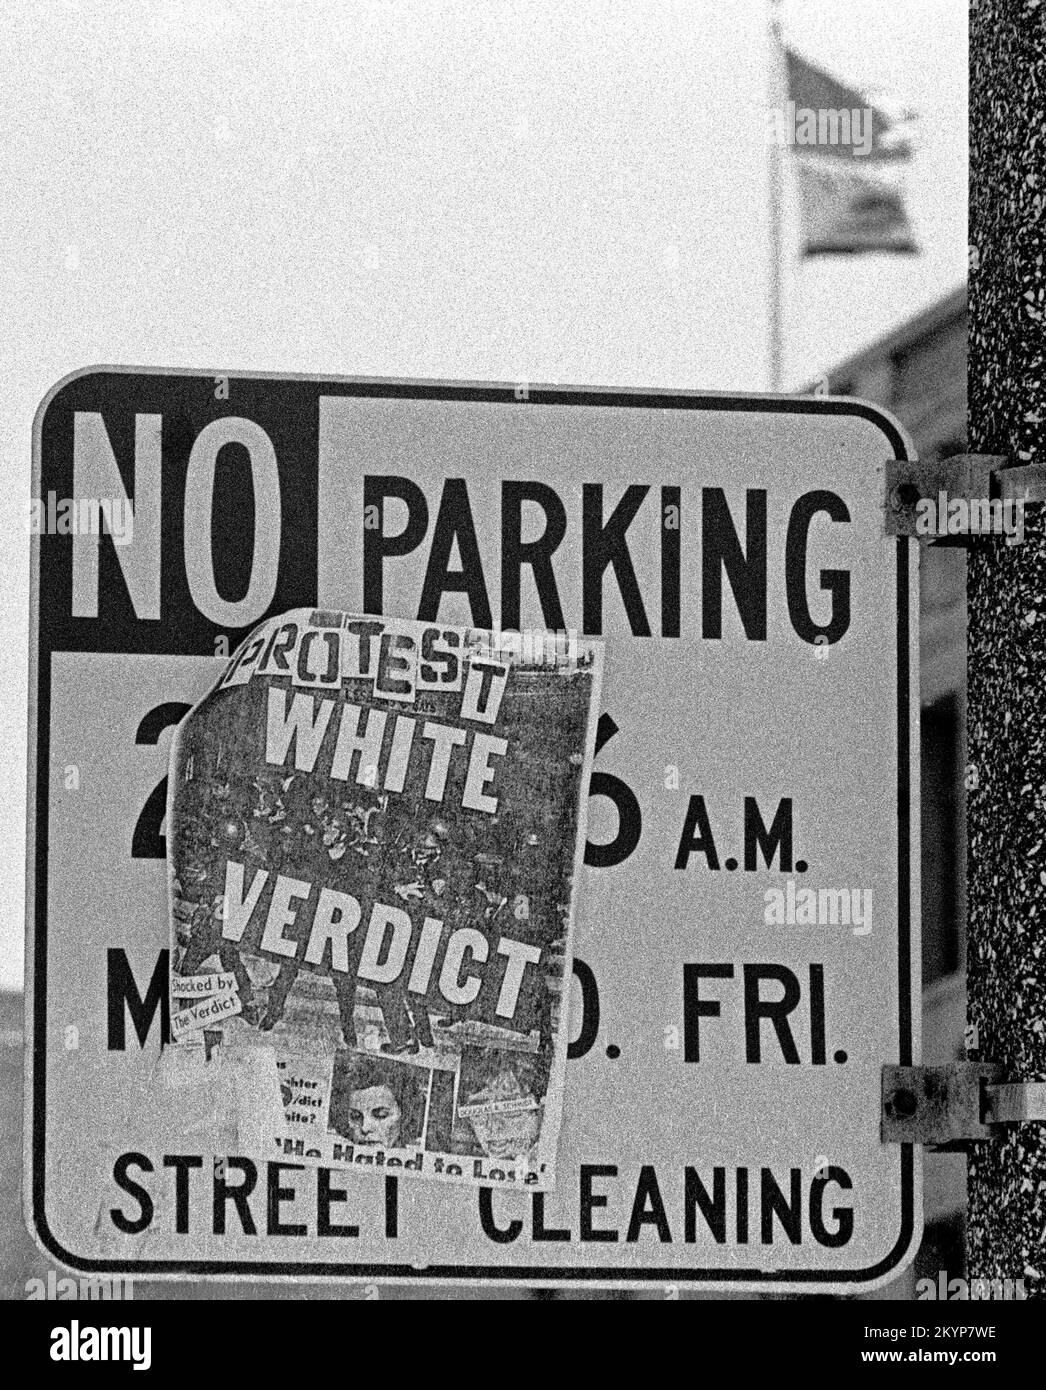 Protest White verdict for the assassination of Supervisor Harvey Milk and Mayor Moscone, poster placed on a no parking sign in San Francisco, California, June, 1979 Stock Photo